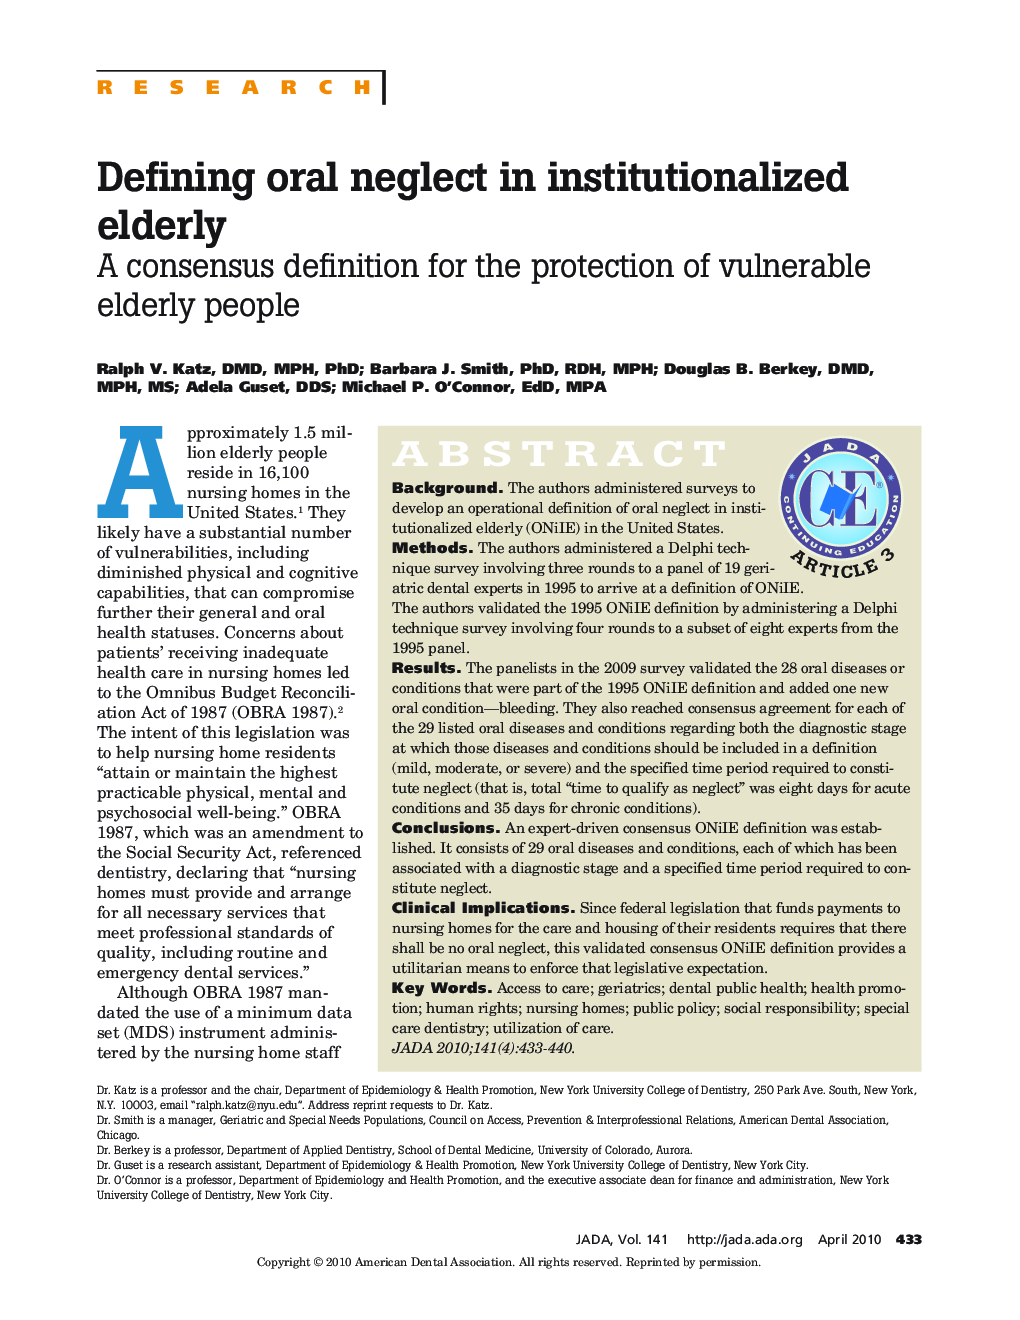 Defining Oral Neglect in Institutionalized Elderly : A Consensus Definition for the Protection of Vulnerable Elderly People